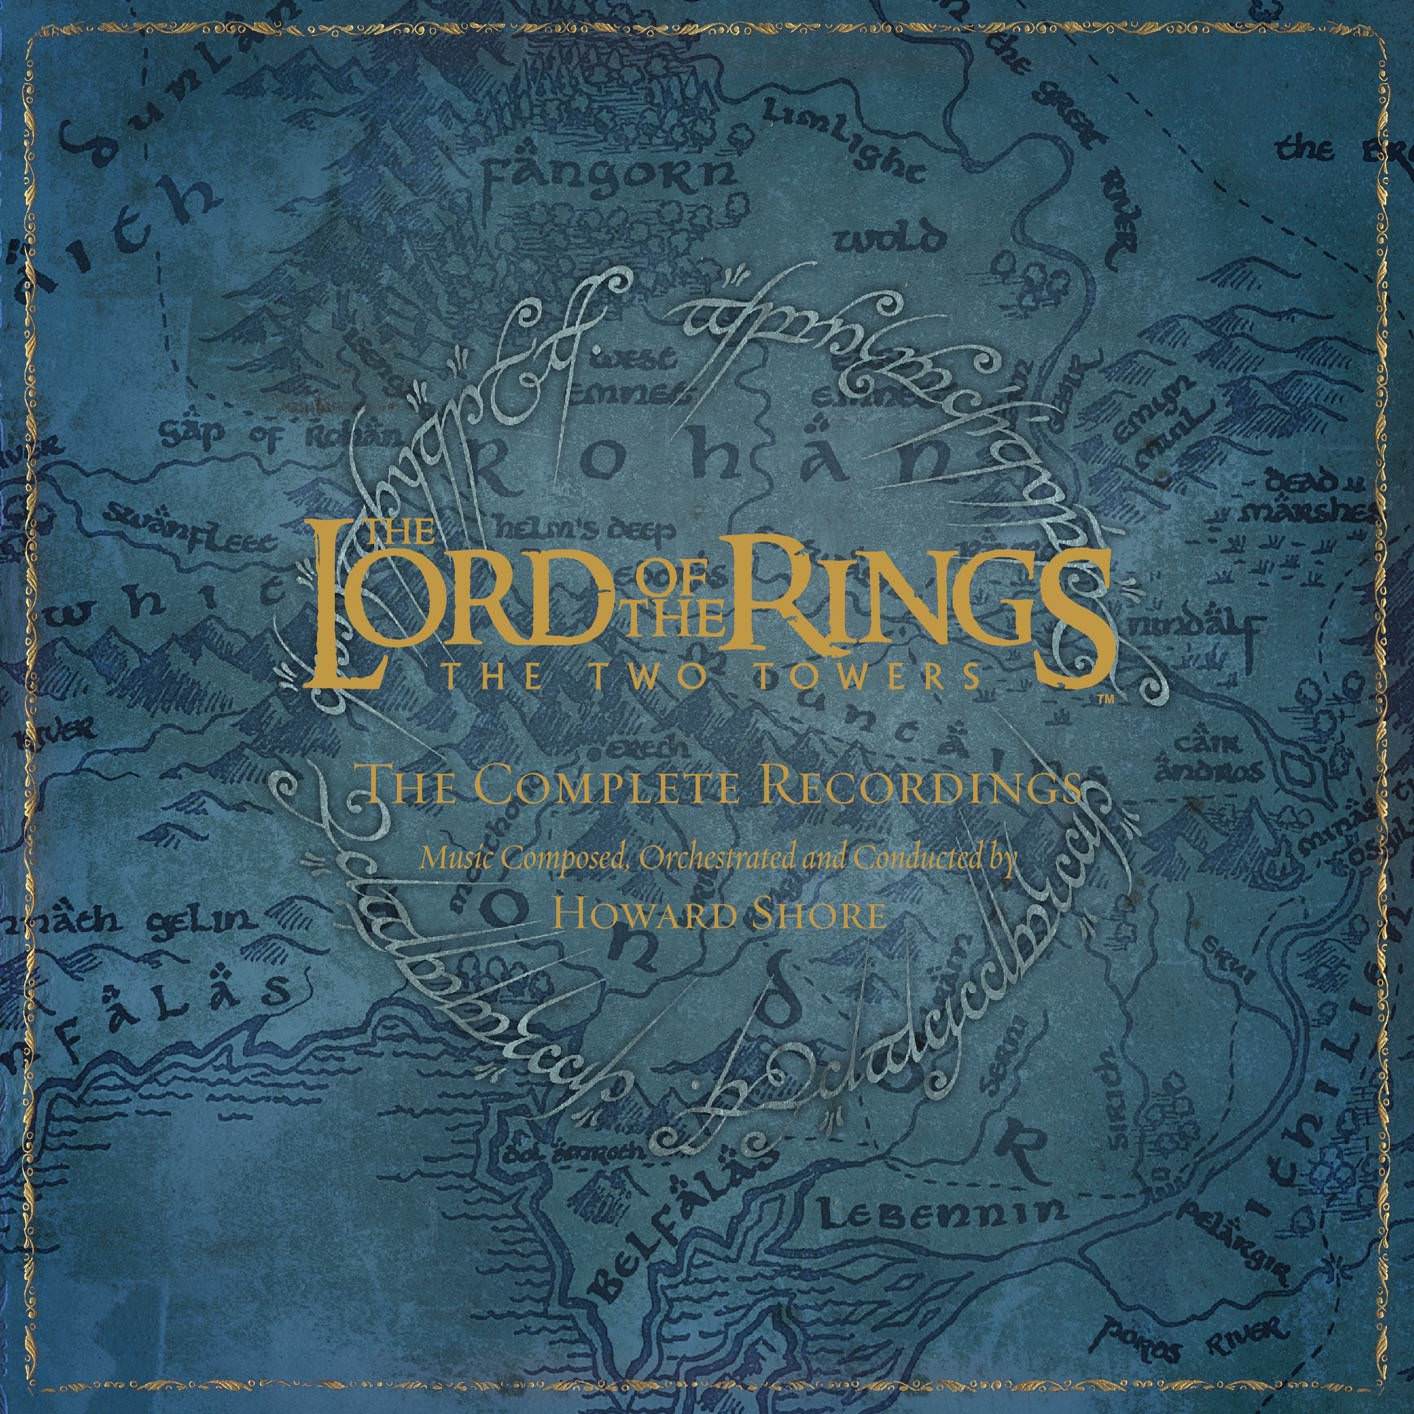 Howard Shore - The Lord Of The Rings: The Two Towers - The Complete Recordings (2006/2018) [FLAC 24bit/48kHz]